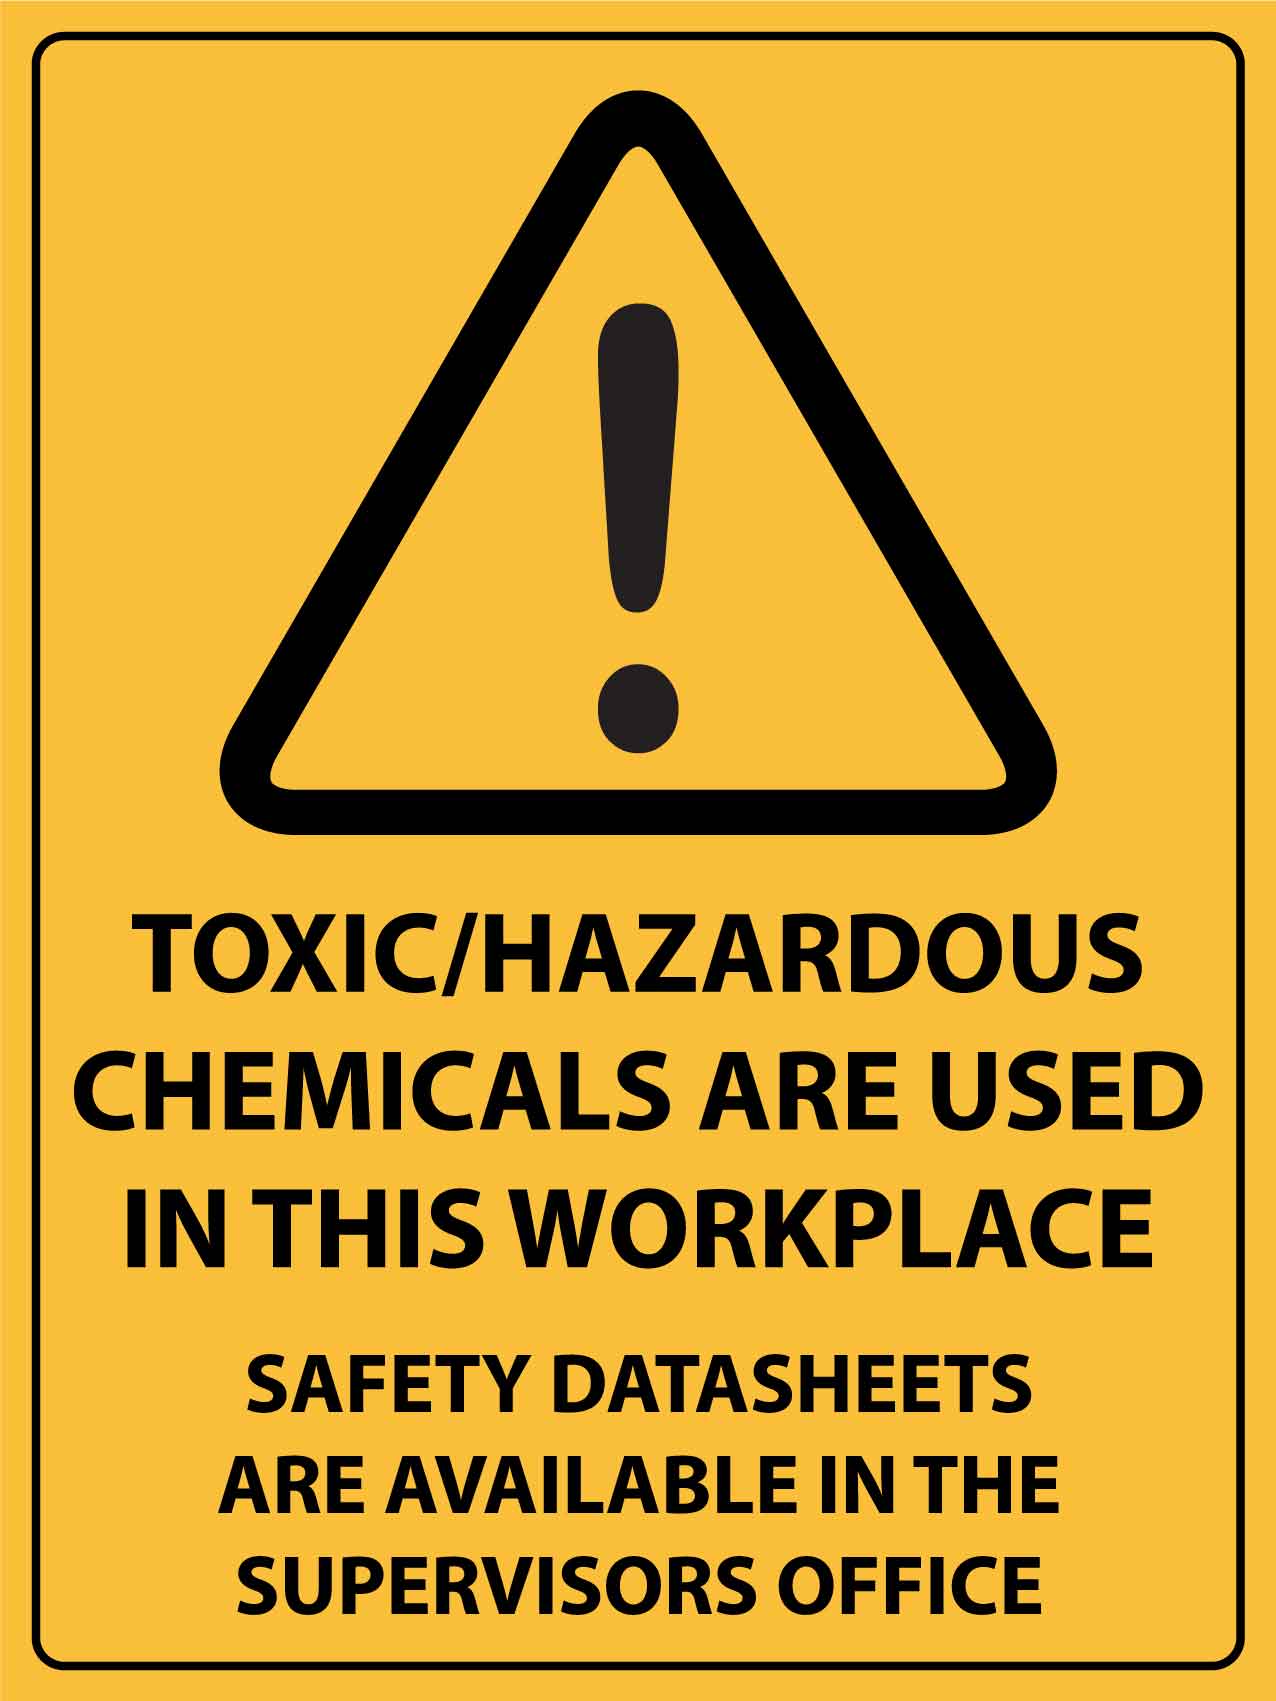 chemical hazard signs